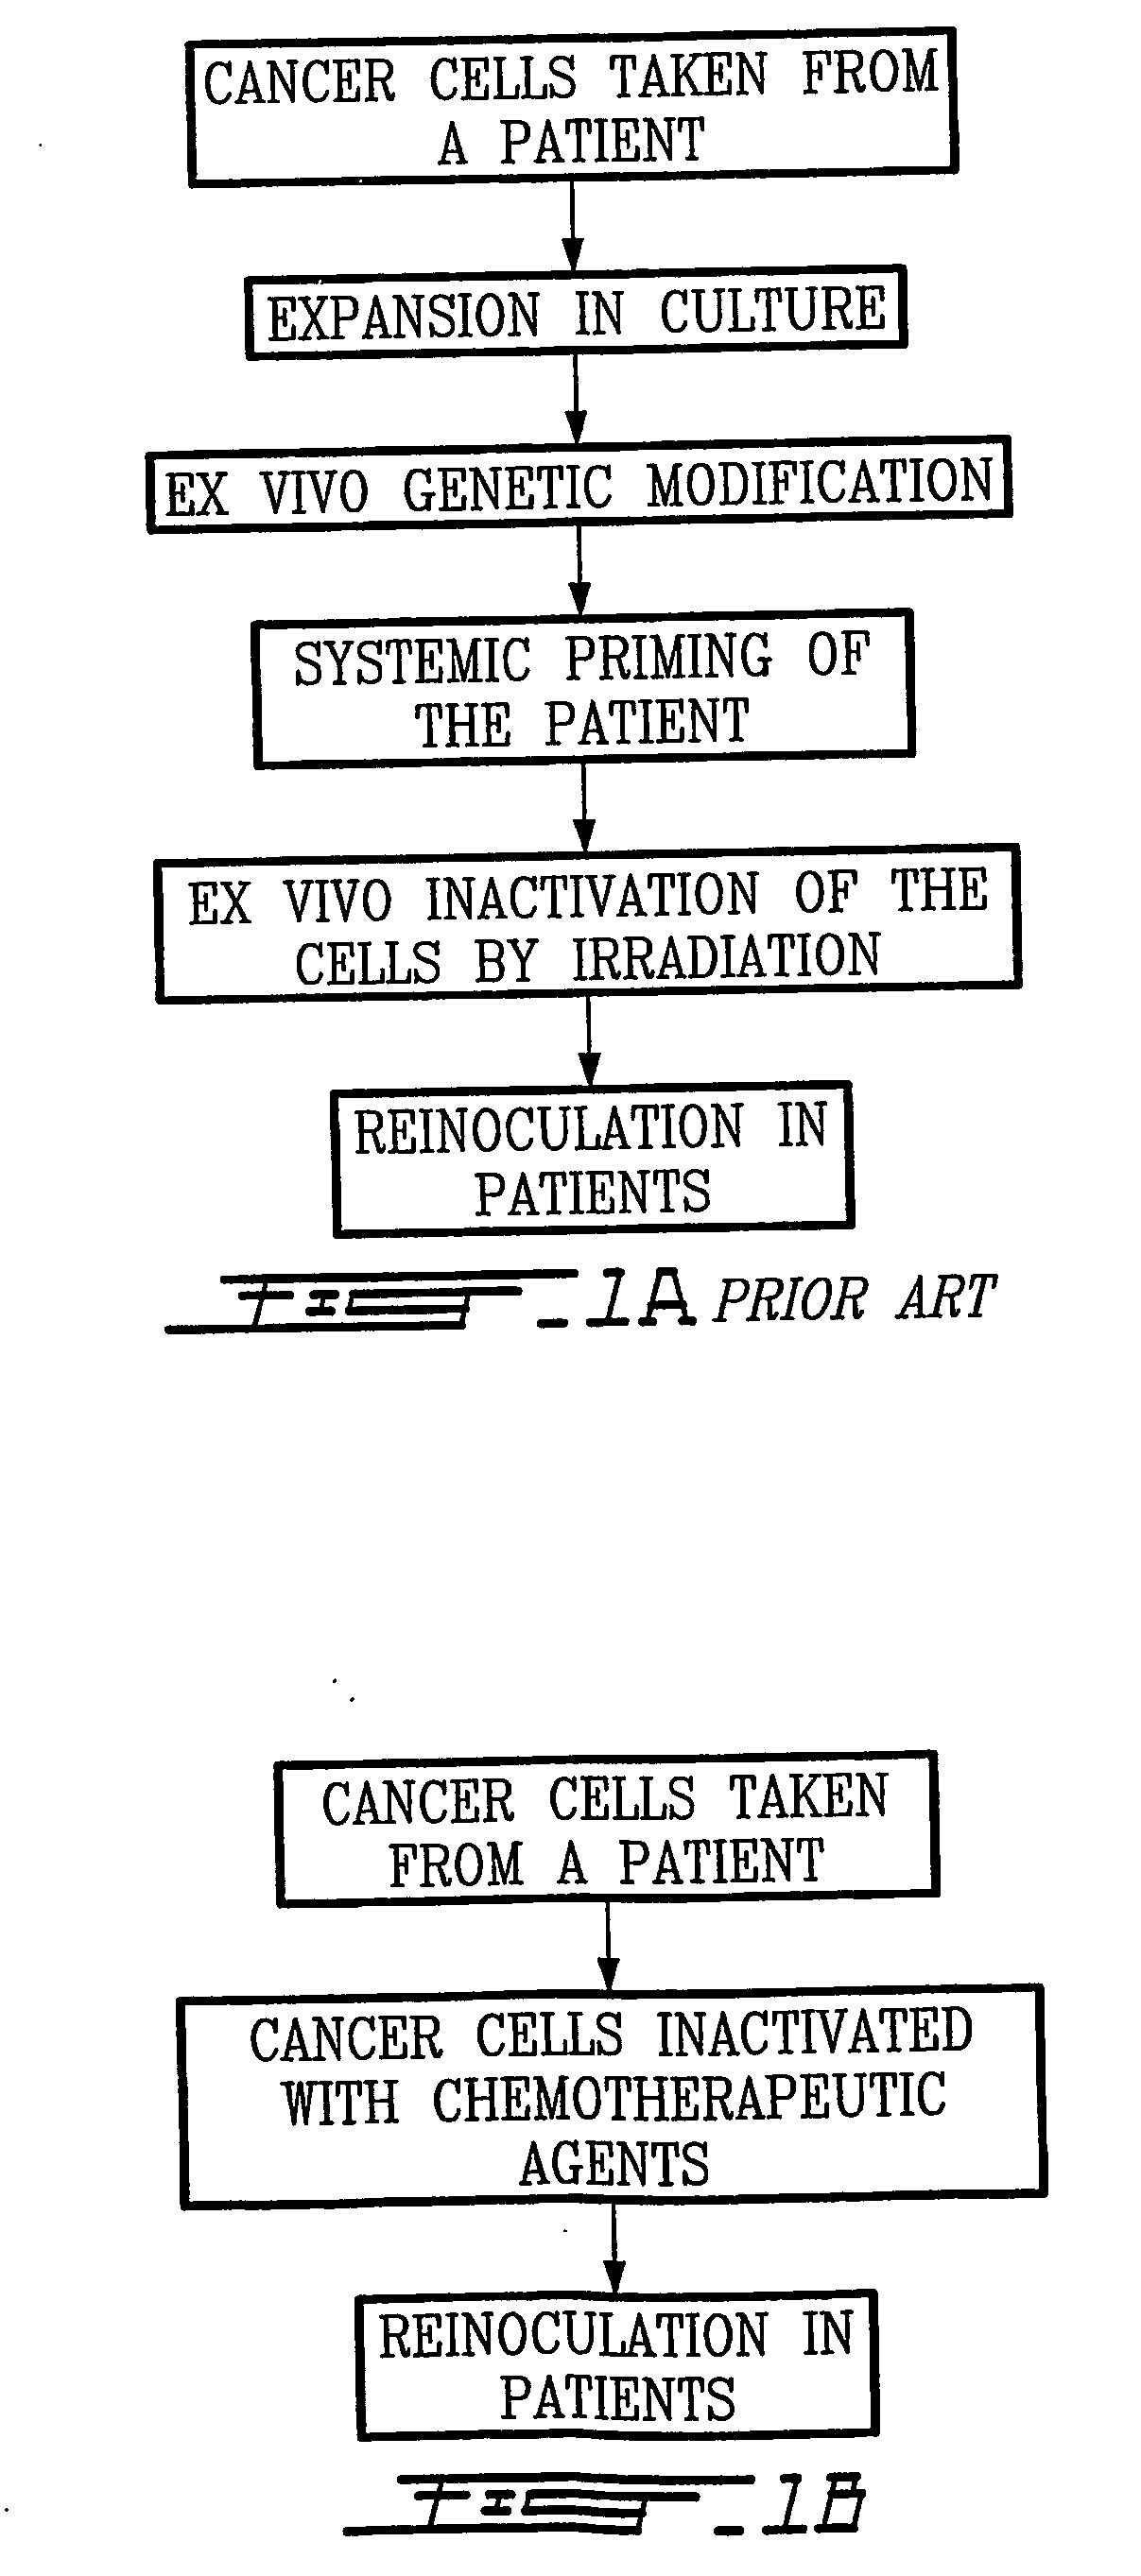 Chemotherapeutic agents as anti-cancer vaccine adjuvants and therapeutic methods thereof